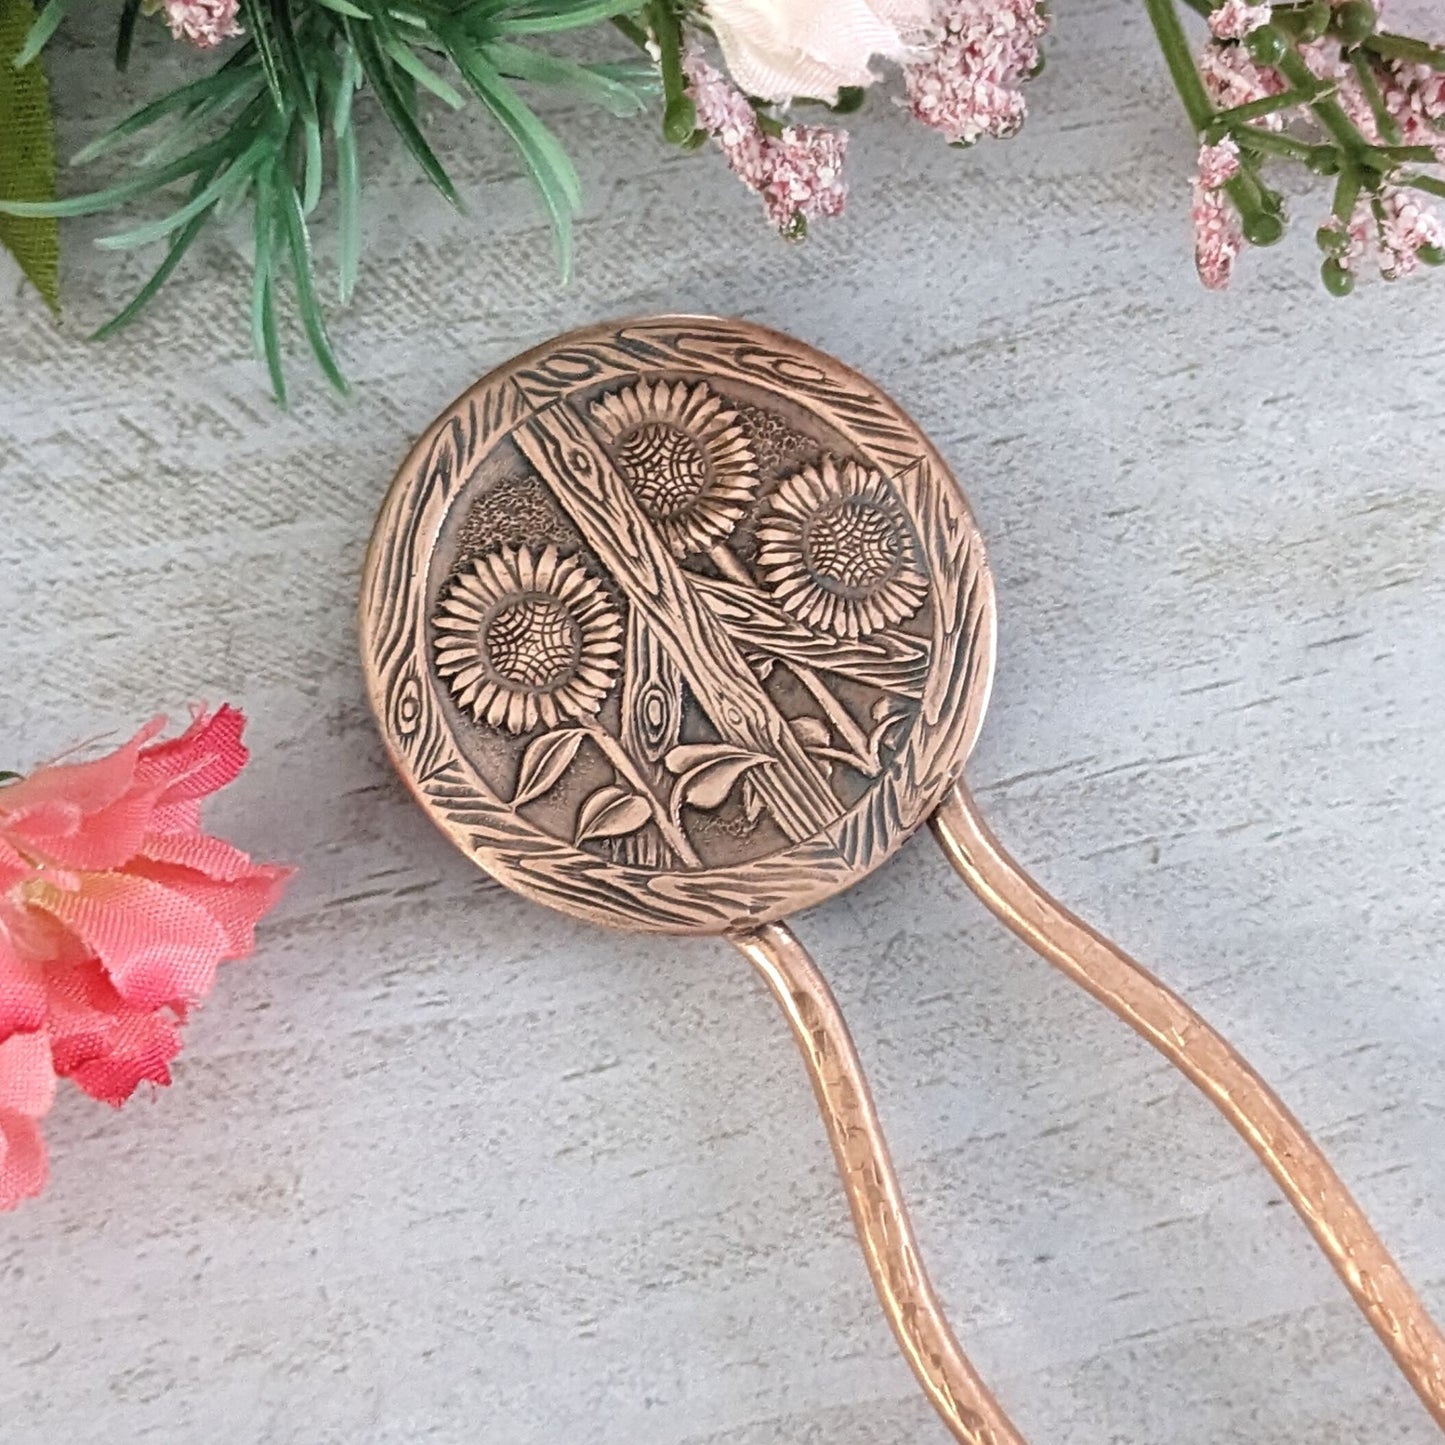 Copper hair fork with a large round design at top of sunflowers and a peace sign. The peace sign has a wood texture. Three sunflowers grow through the wood sign. There's a lot of detail - veins on the leaves, you can see the sunflower seeds and petals. On a copper fork with a hammered finish. Staged on a gray background surrounded by flowers.